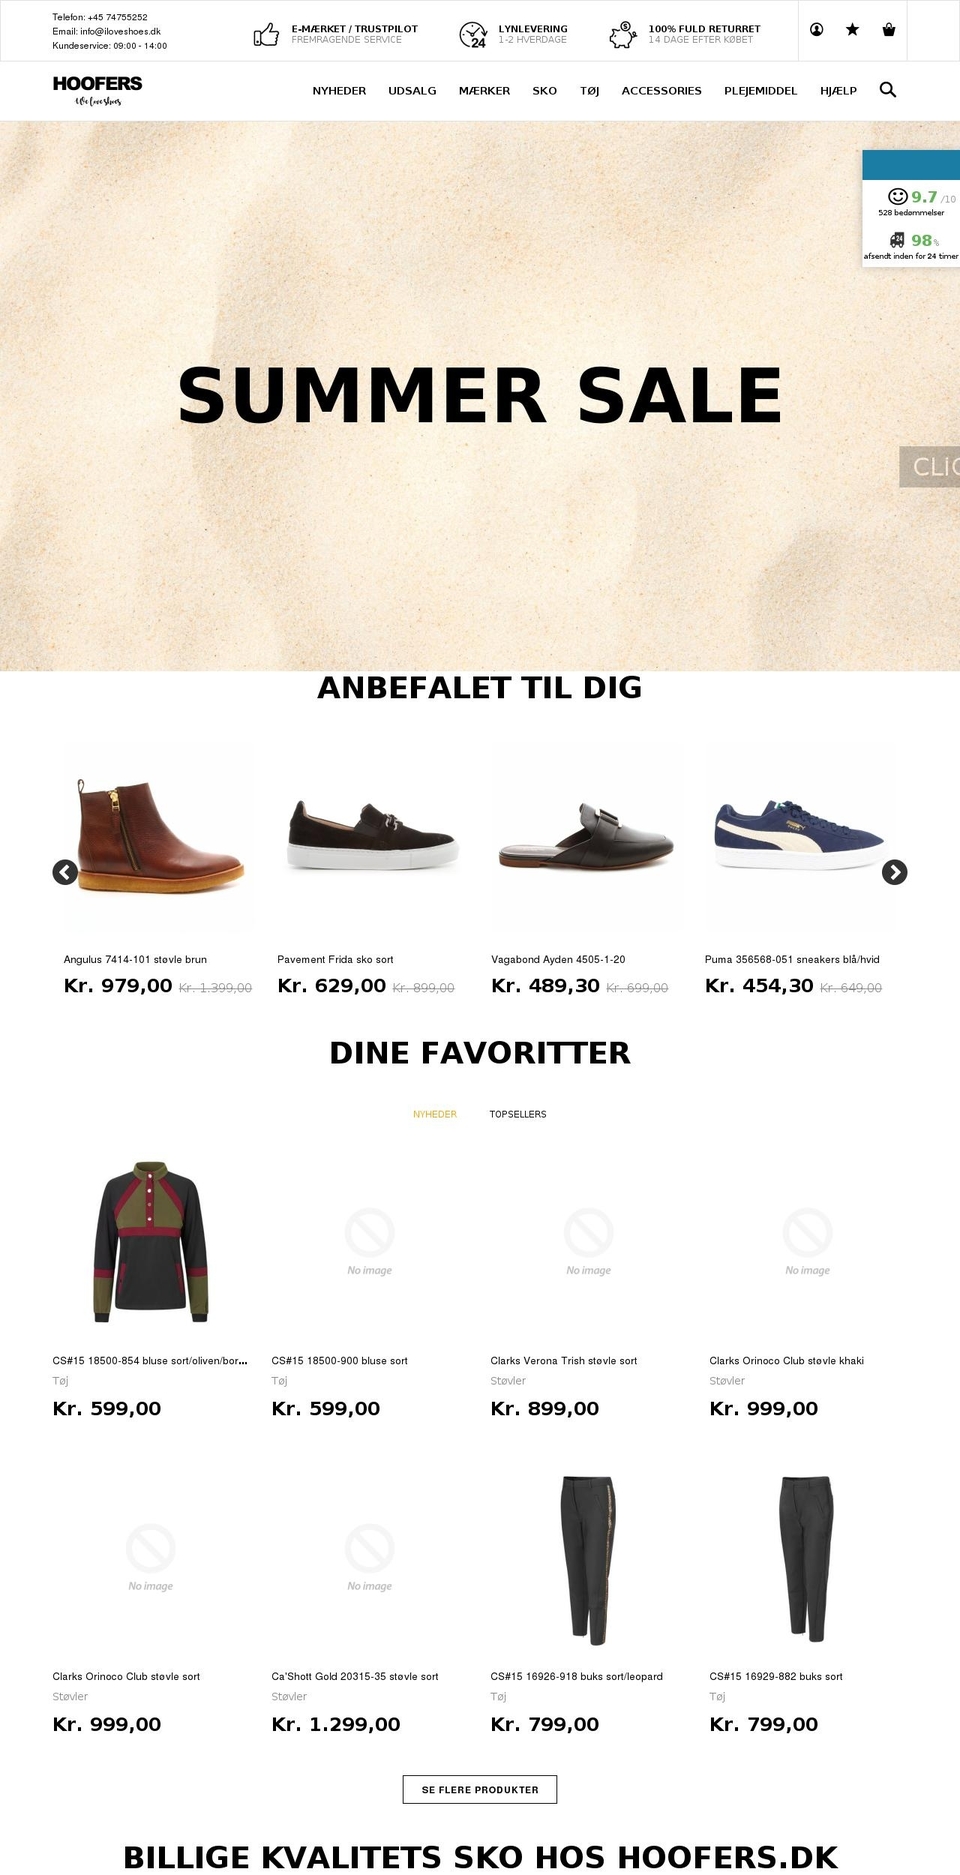 Handy Shopify theme site example hoofers.dk